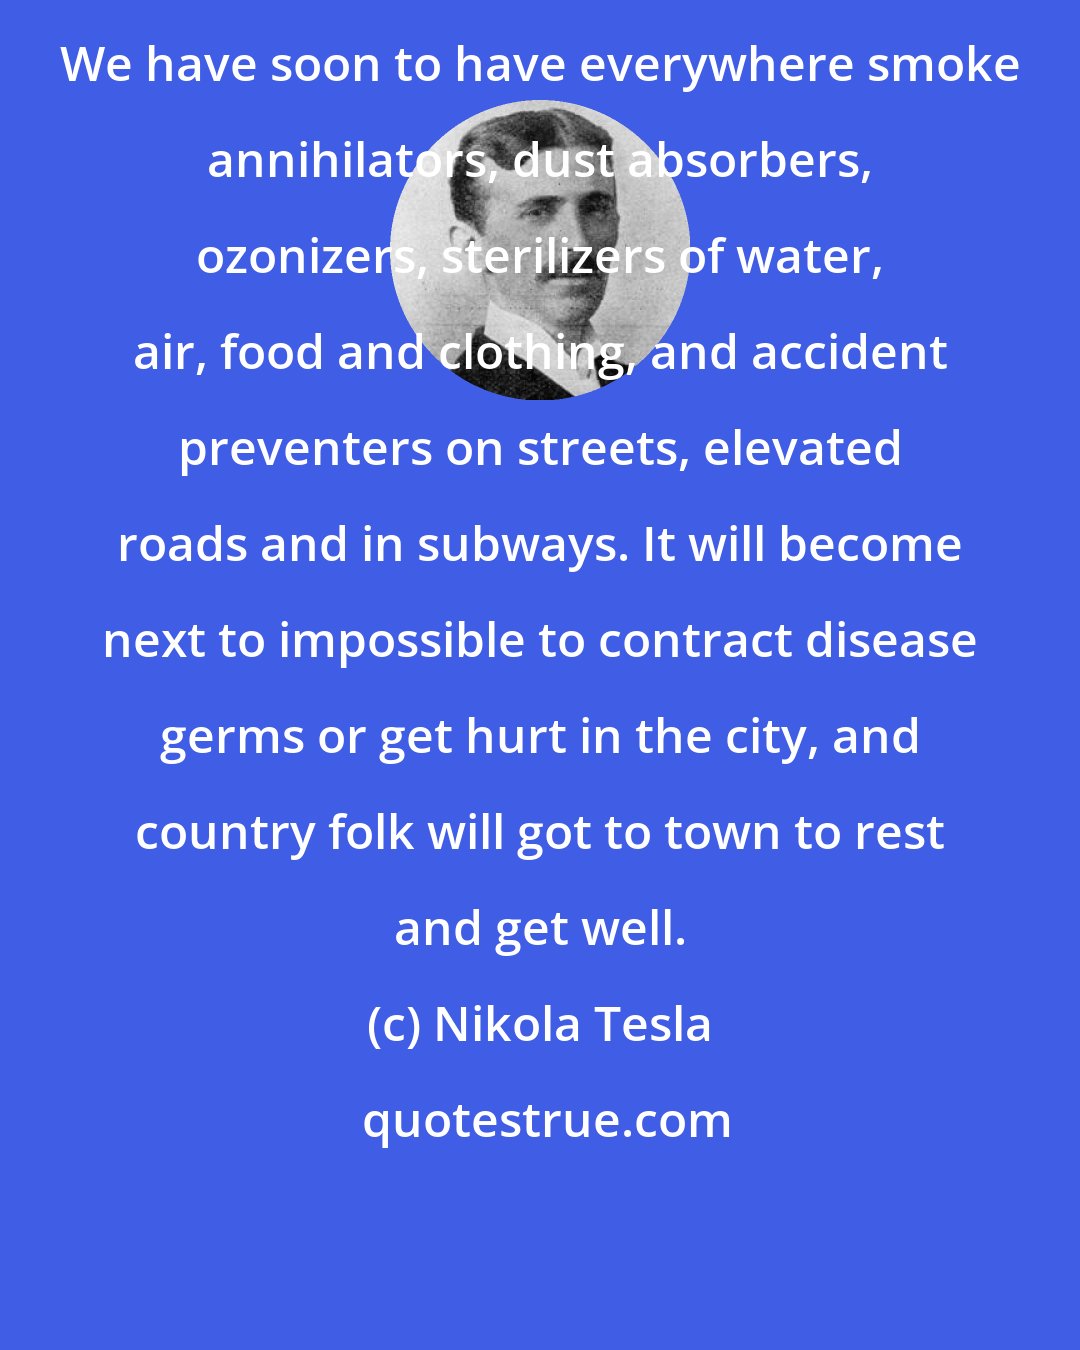 Nikola Tesla: We have soon to have everywhere smoke annihilators, dust absorbers, ozonizers, sterilizers of water, air, food and clothing, and accident preventers on streets, elevated roads and in subways. It will become next to impossible to contract disease germs or get hurt in the city, and country folk will got to town to rest and get well.